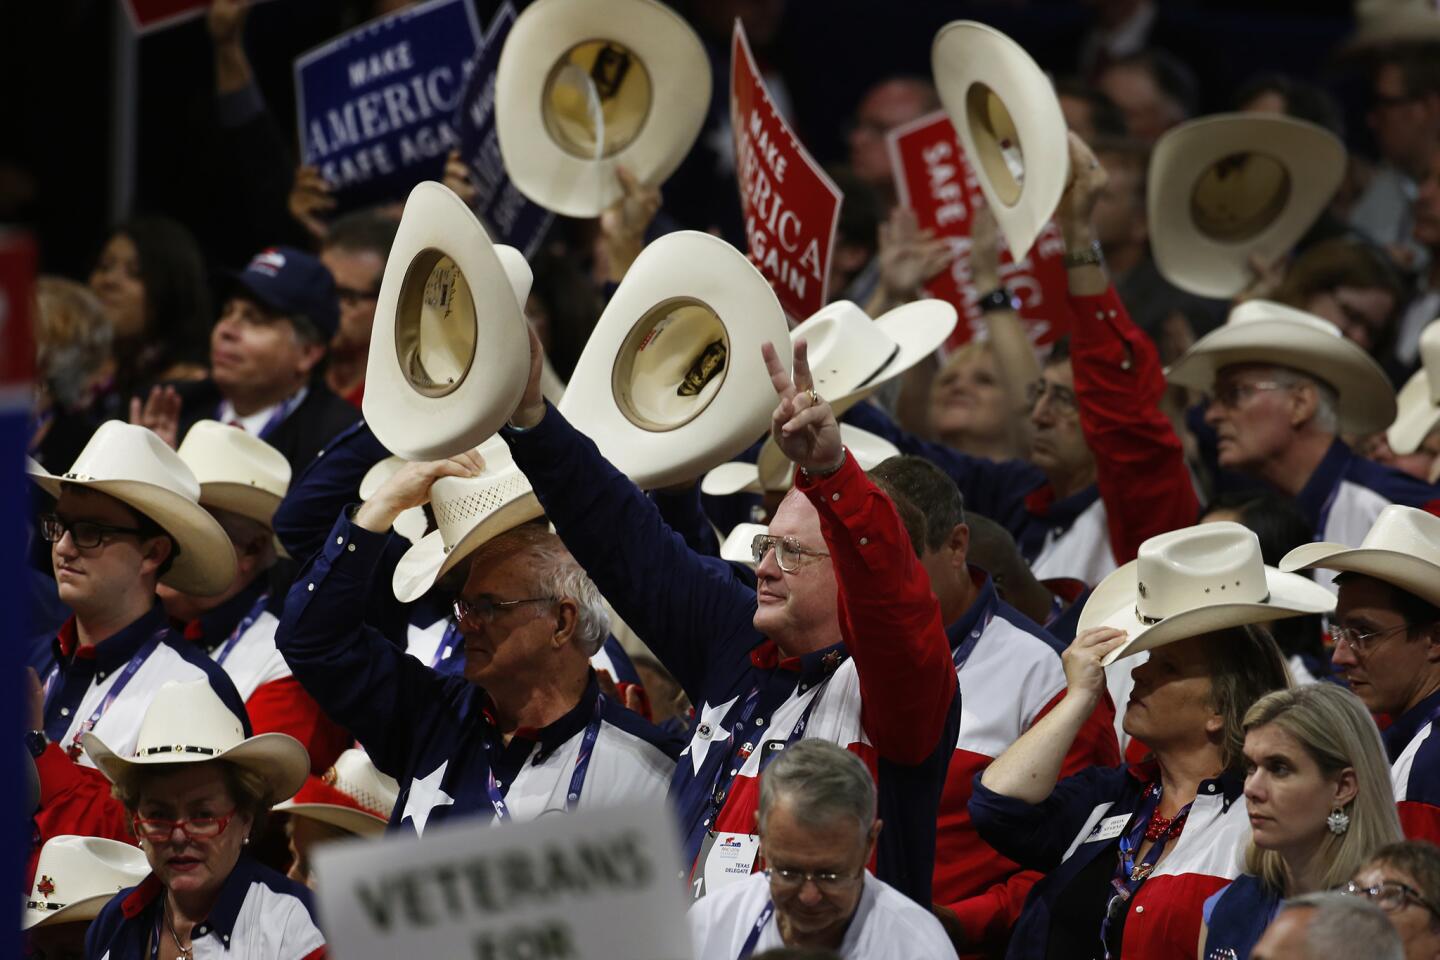 Inside the Republican National Convention